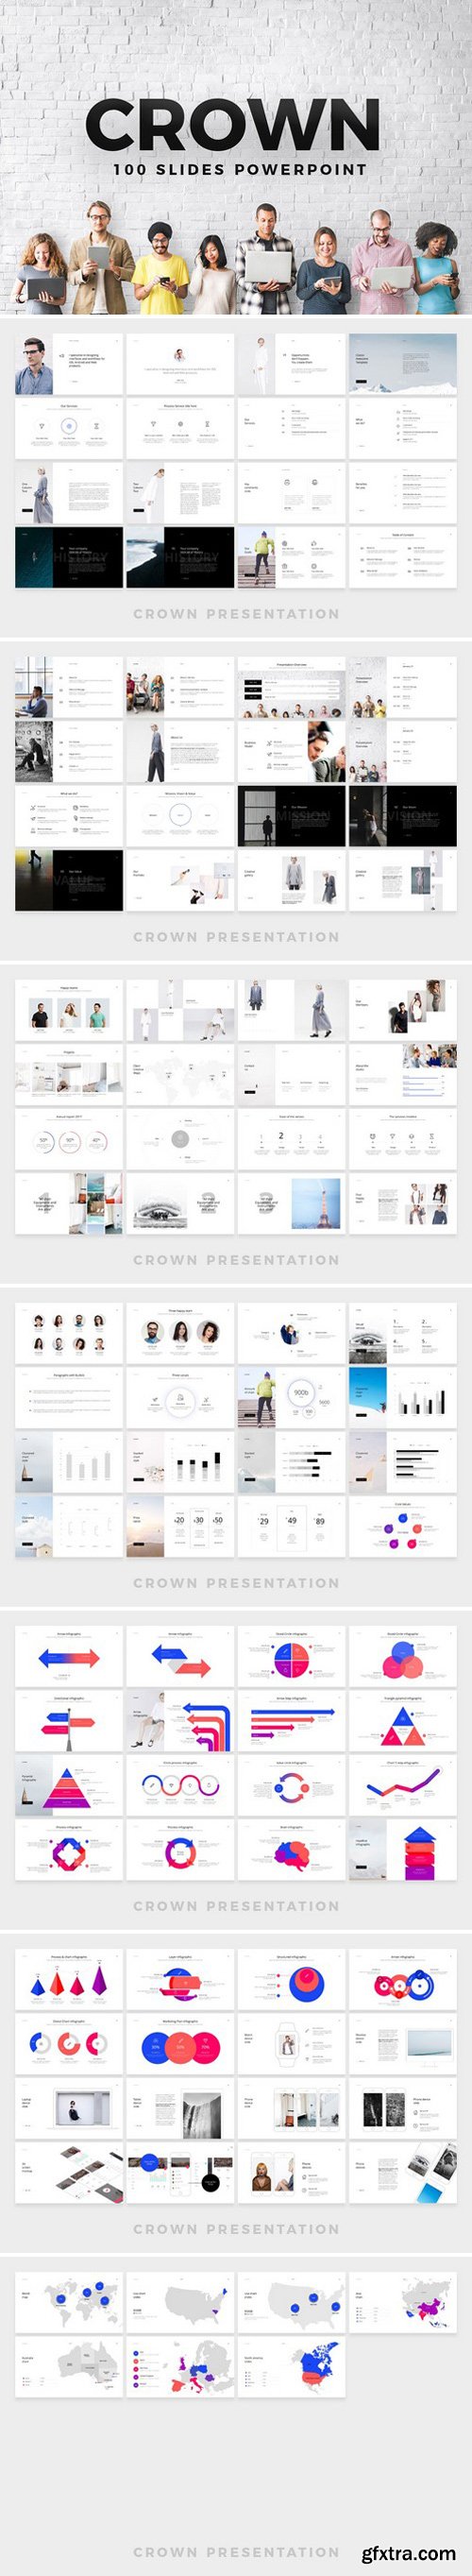 CM - CROWN Powerpoint Template 1818973